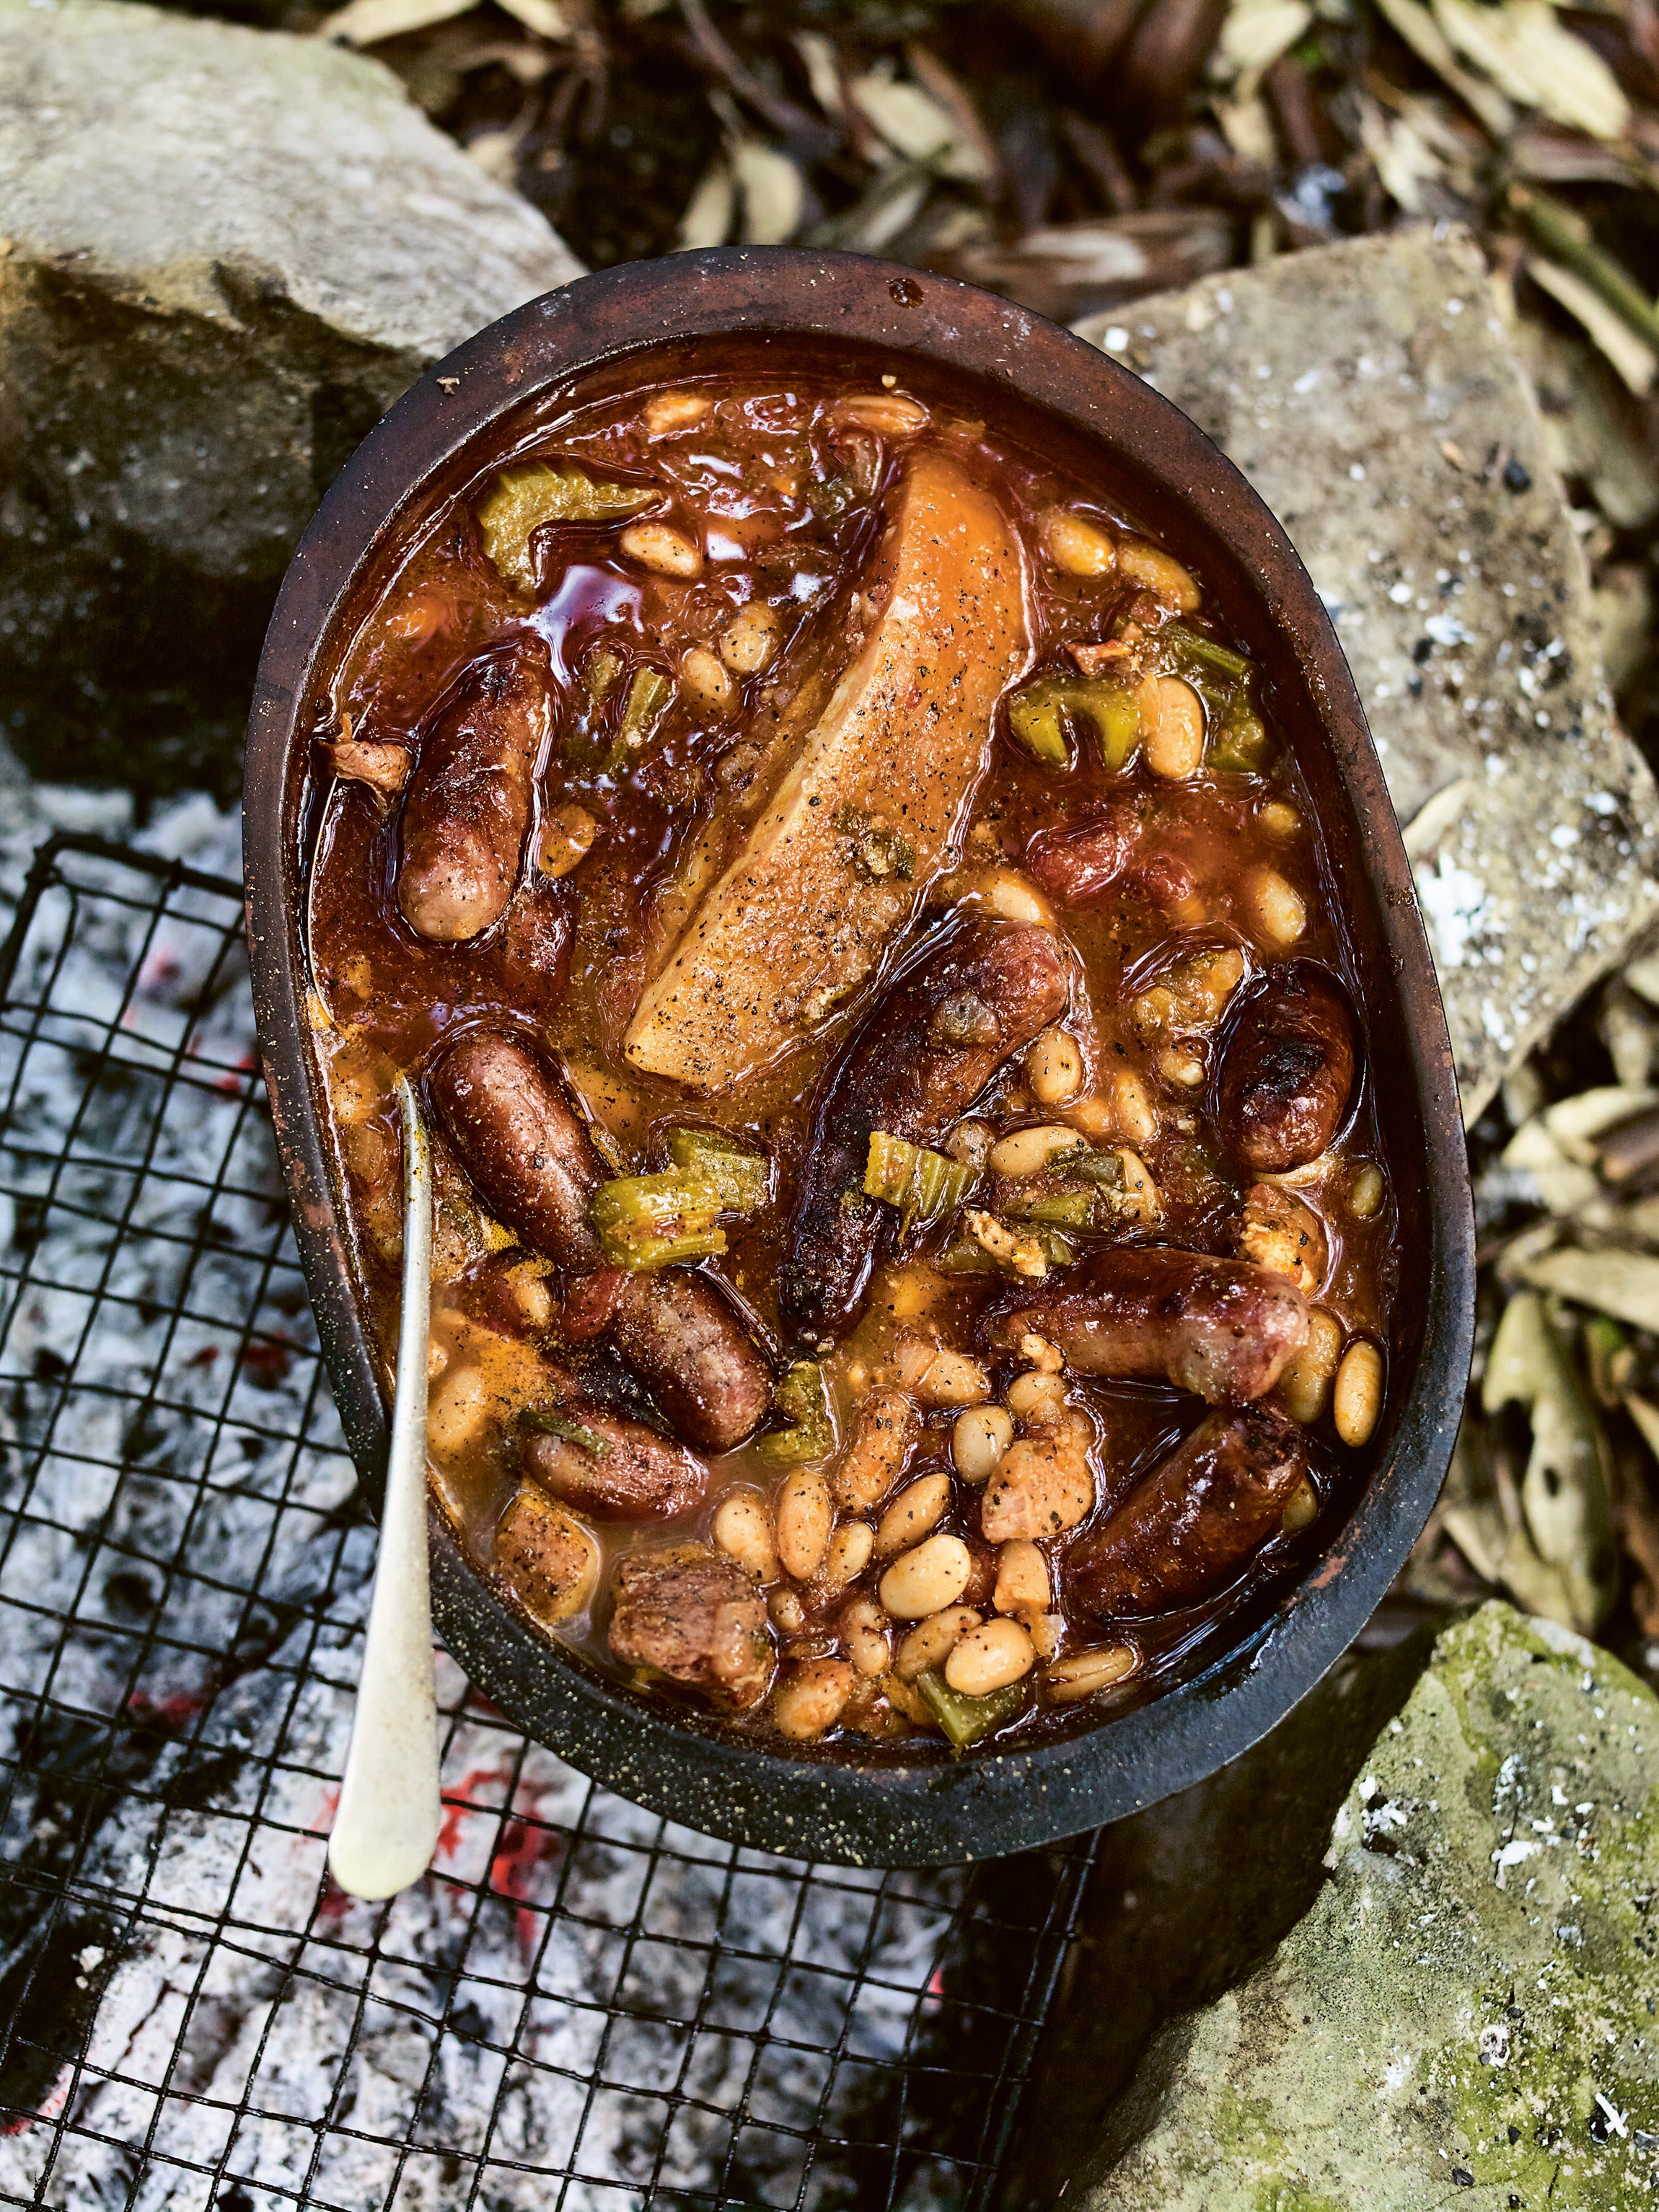 This dish is somewhere between a cassoulet and Boston baked beans